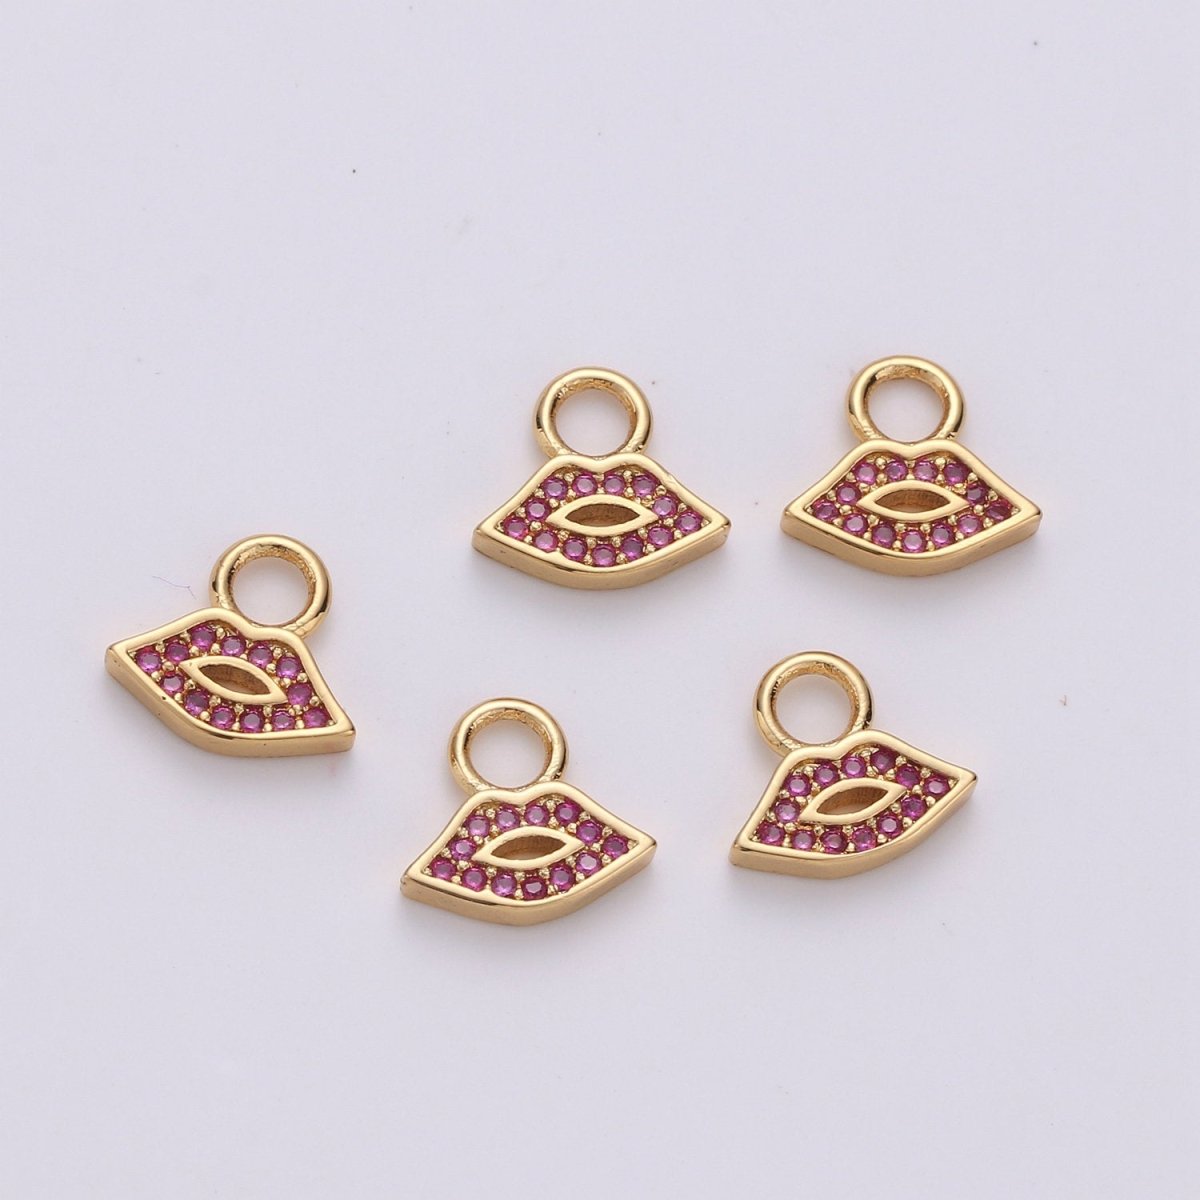 14K Gold Filled CZ Lips Pendant, Micro Pave Cubic Zirconia Kiss, Small Gold Lips Charm for Necklace Bracelet Earring Charm 4mm top hole D-048 - DLUXCA